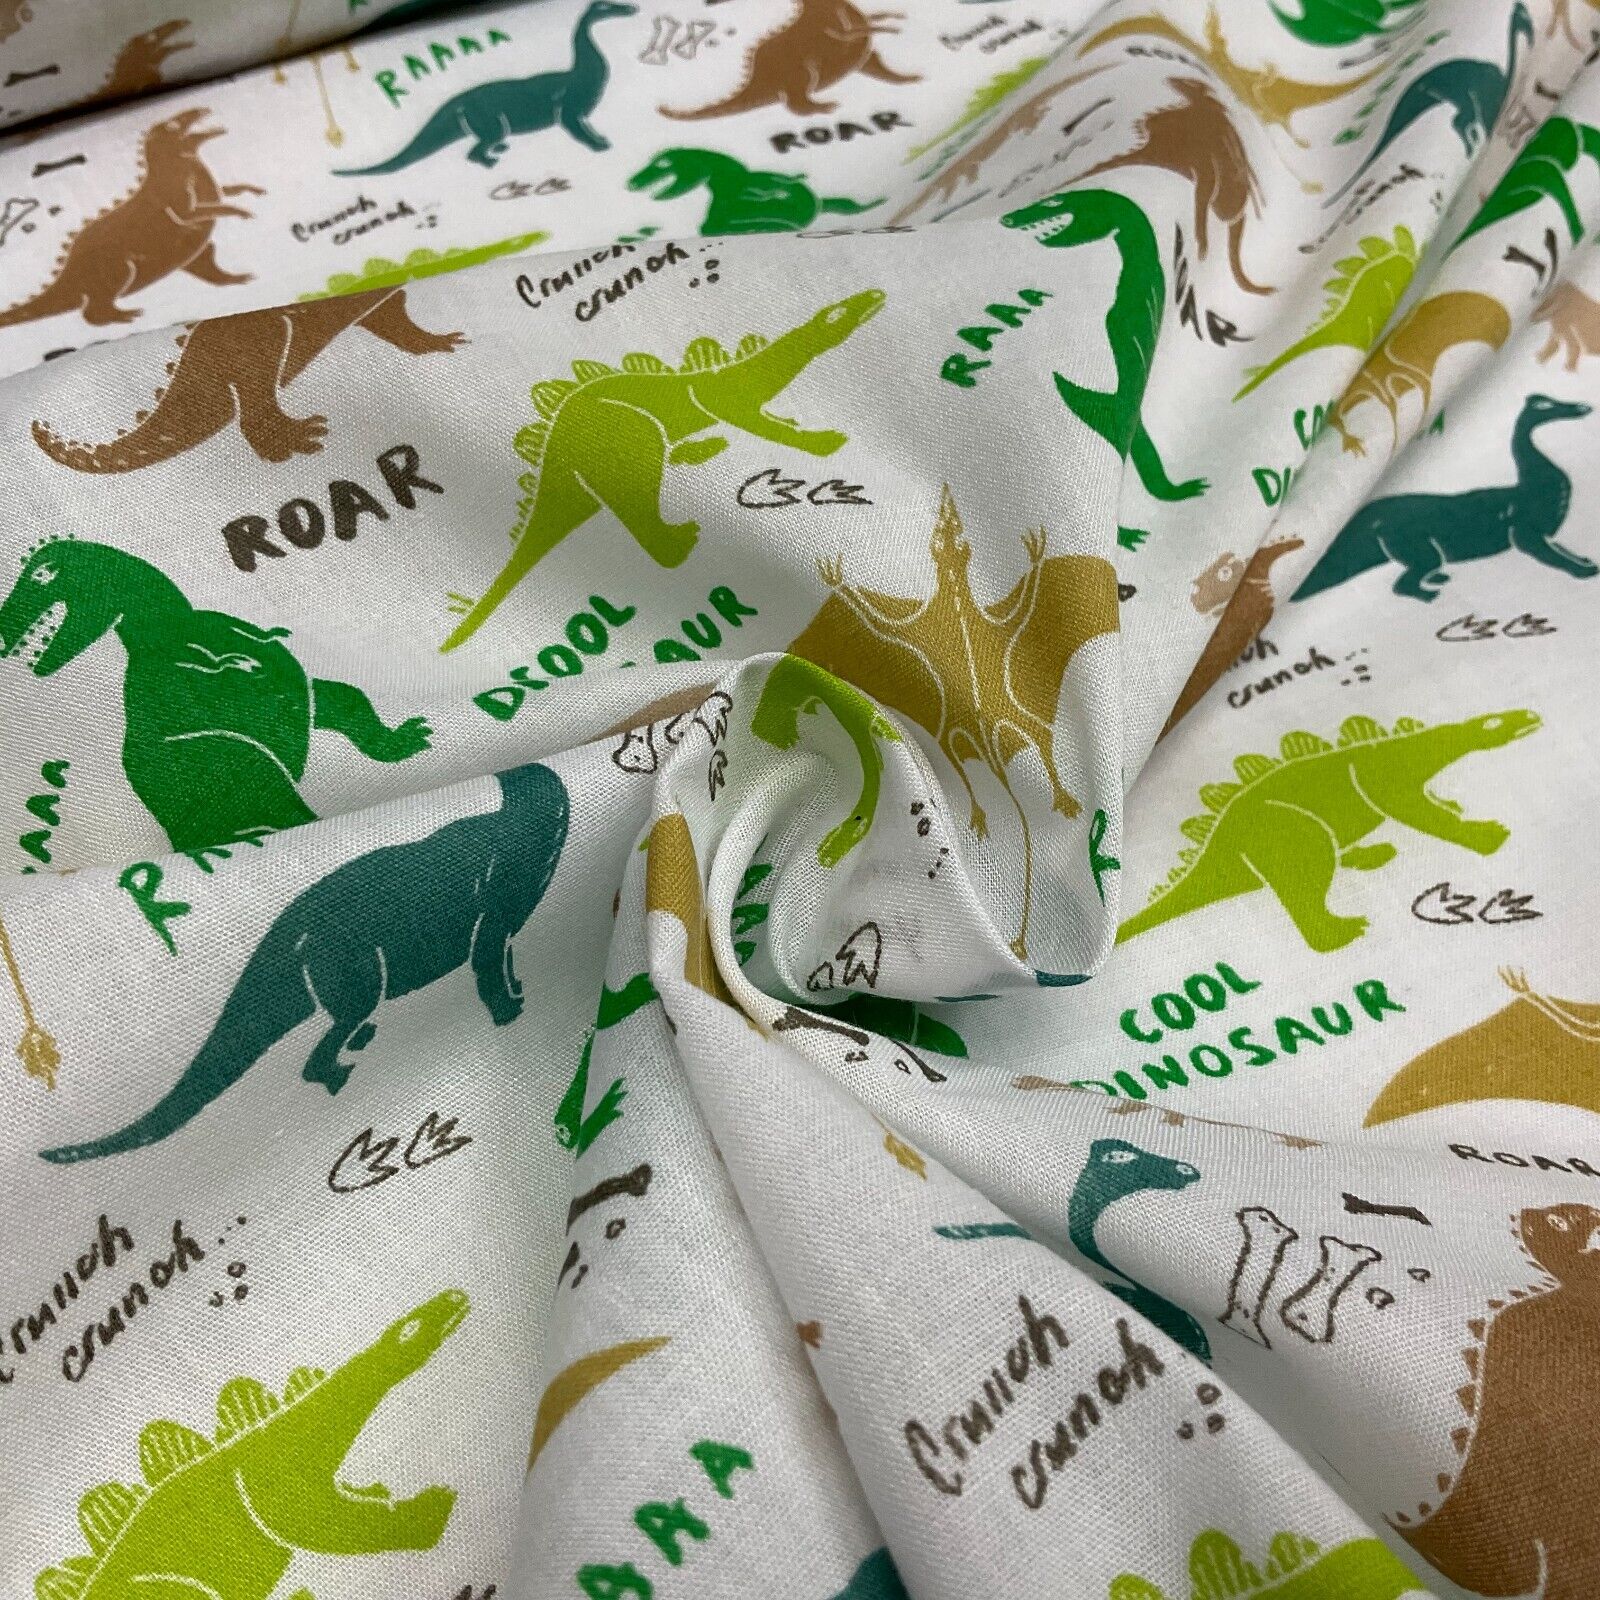 White green dinosaurs Children's Poly cotton printed lightweight fabric M1643